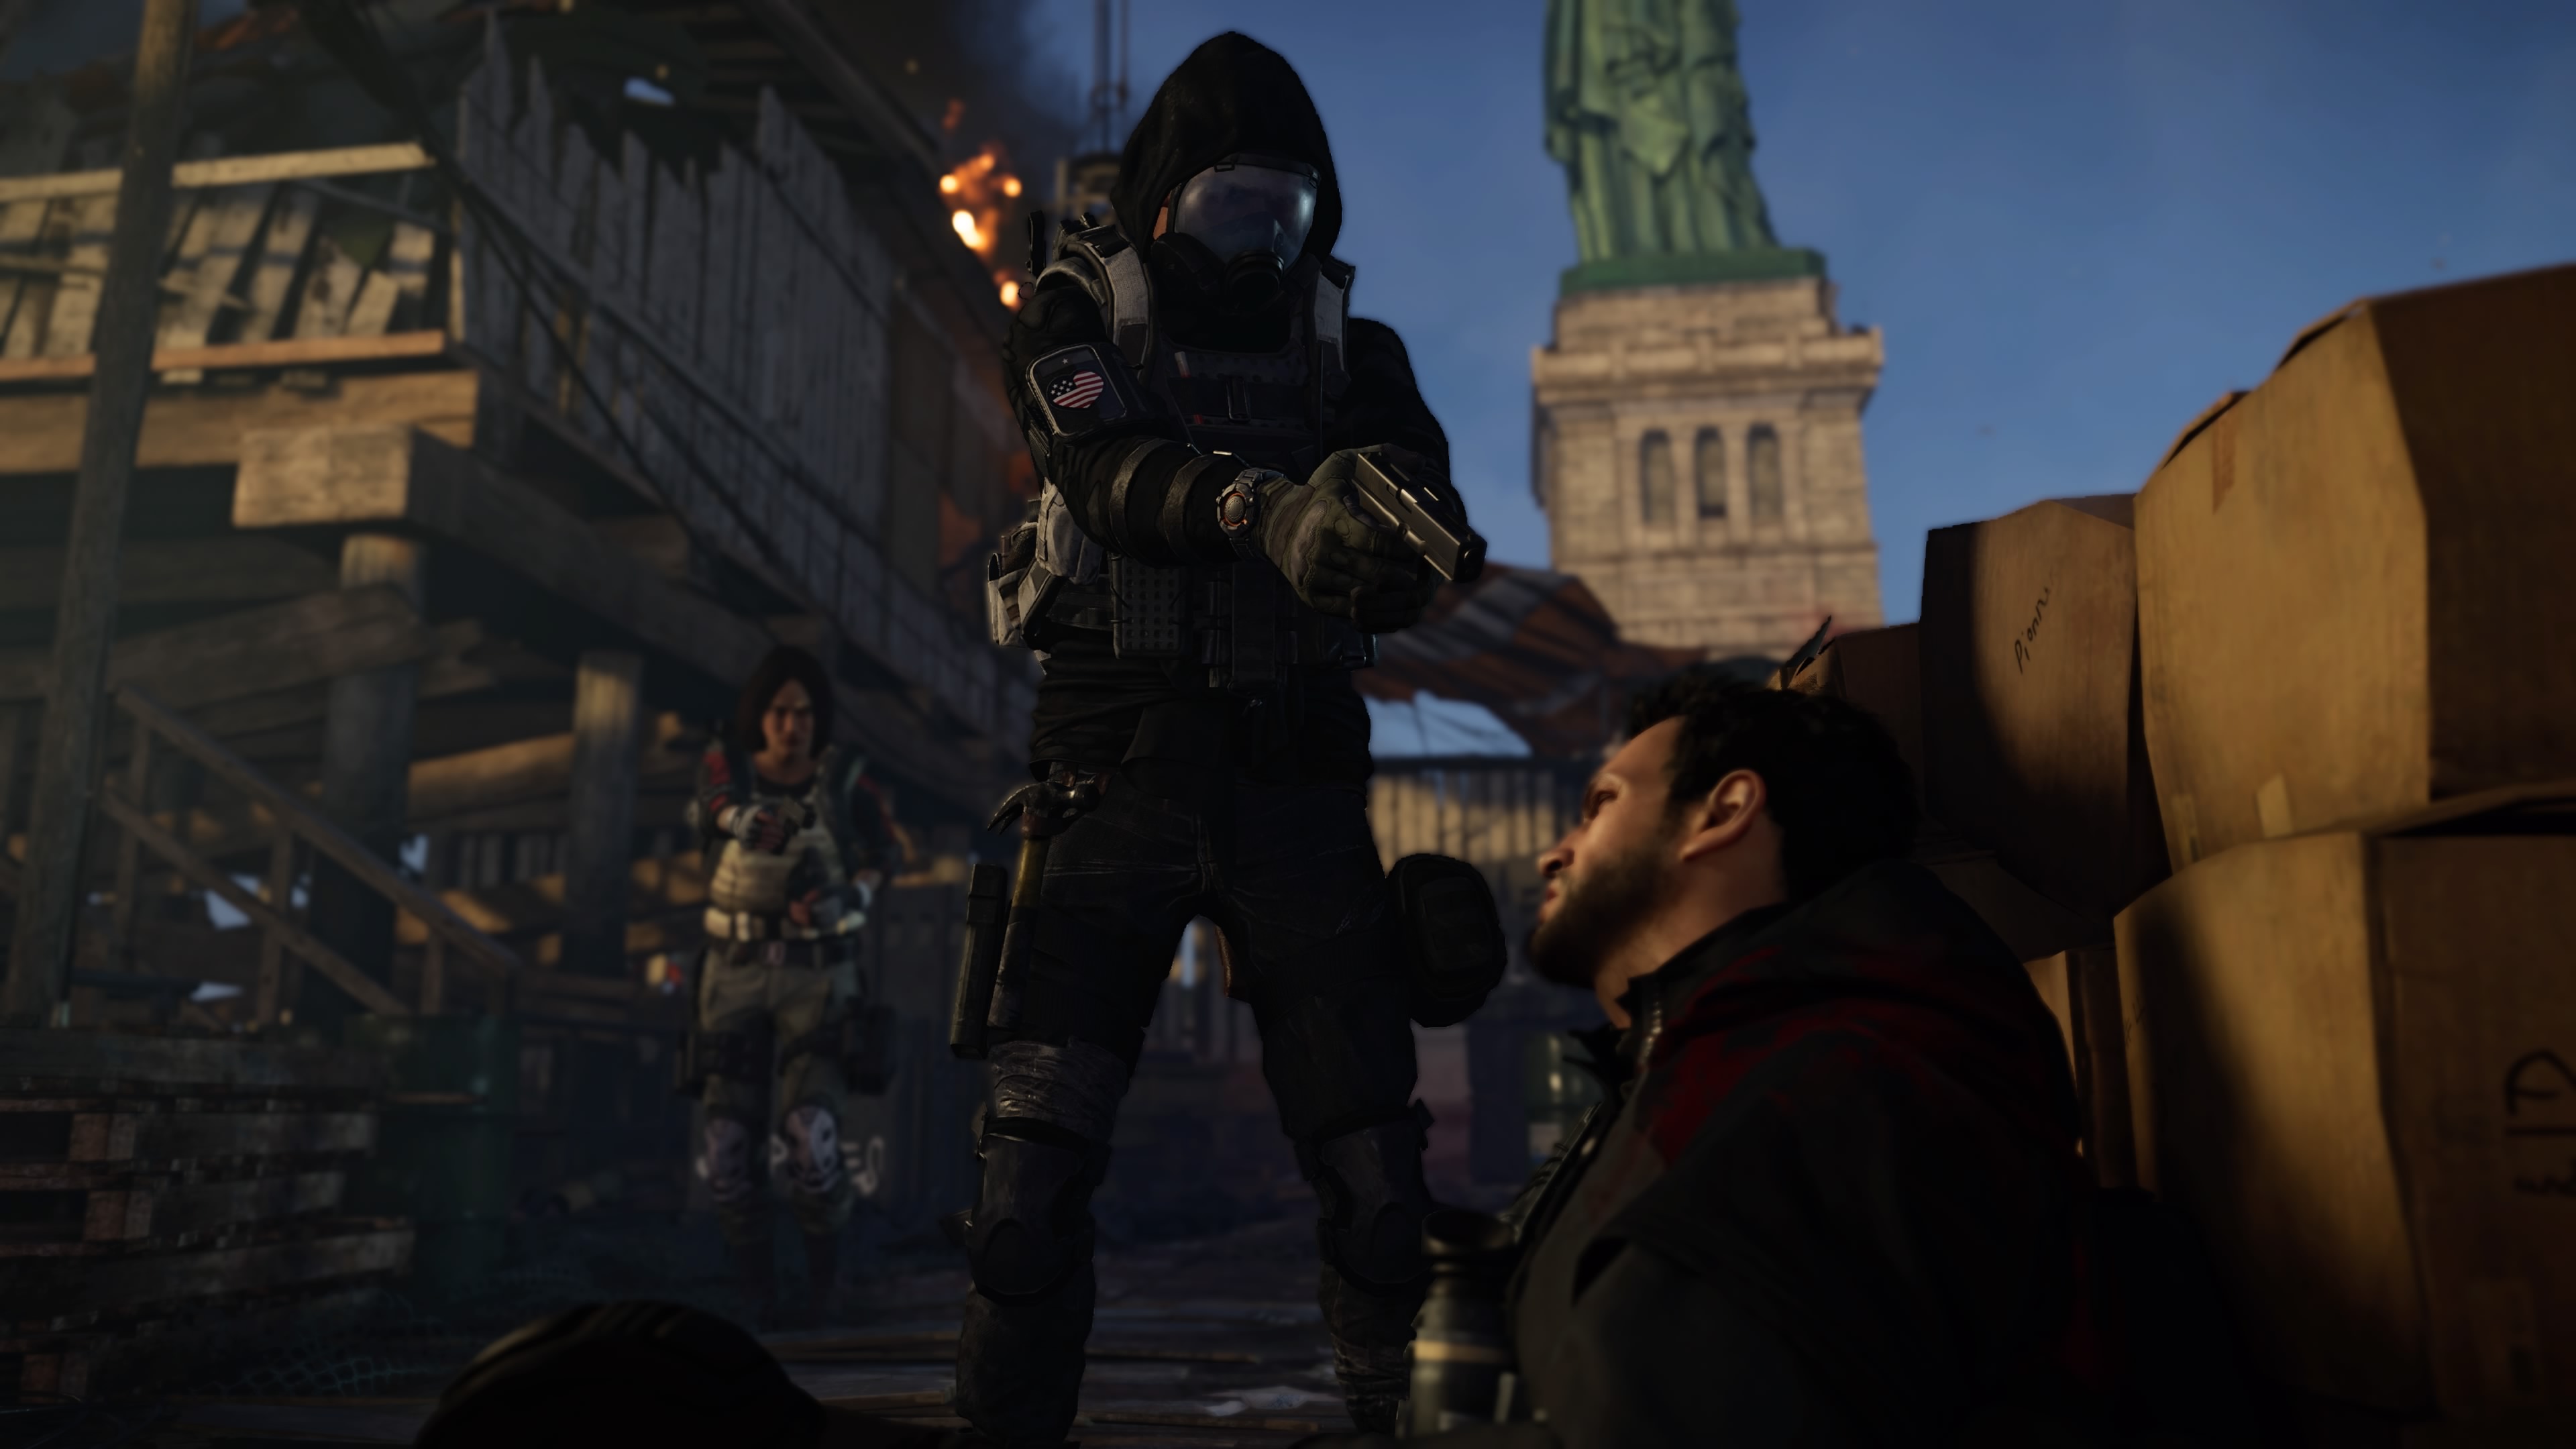 division-2-warlords-of-new-york-how-to-beat-the-last-boss-aaron